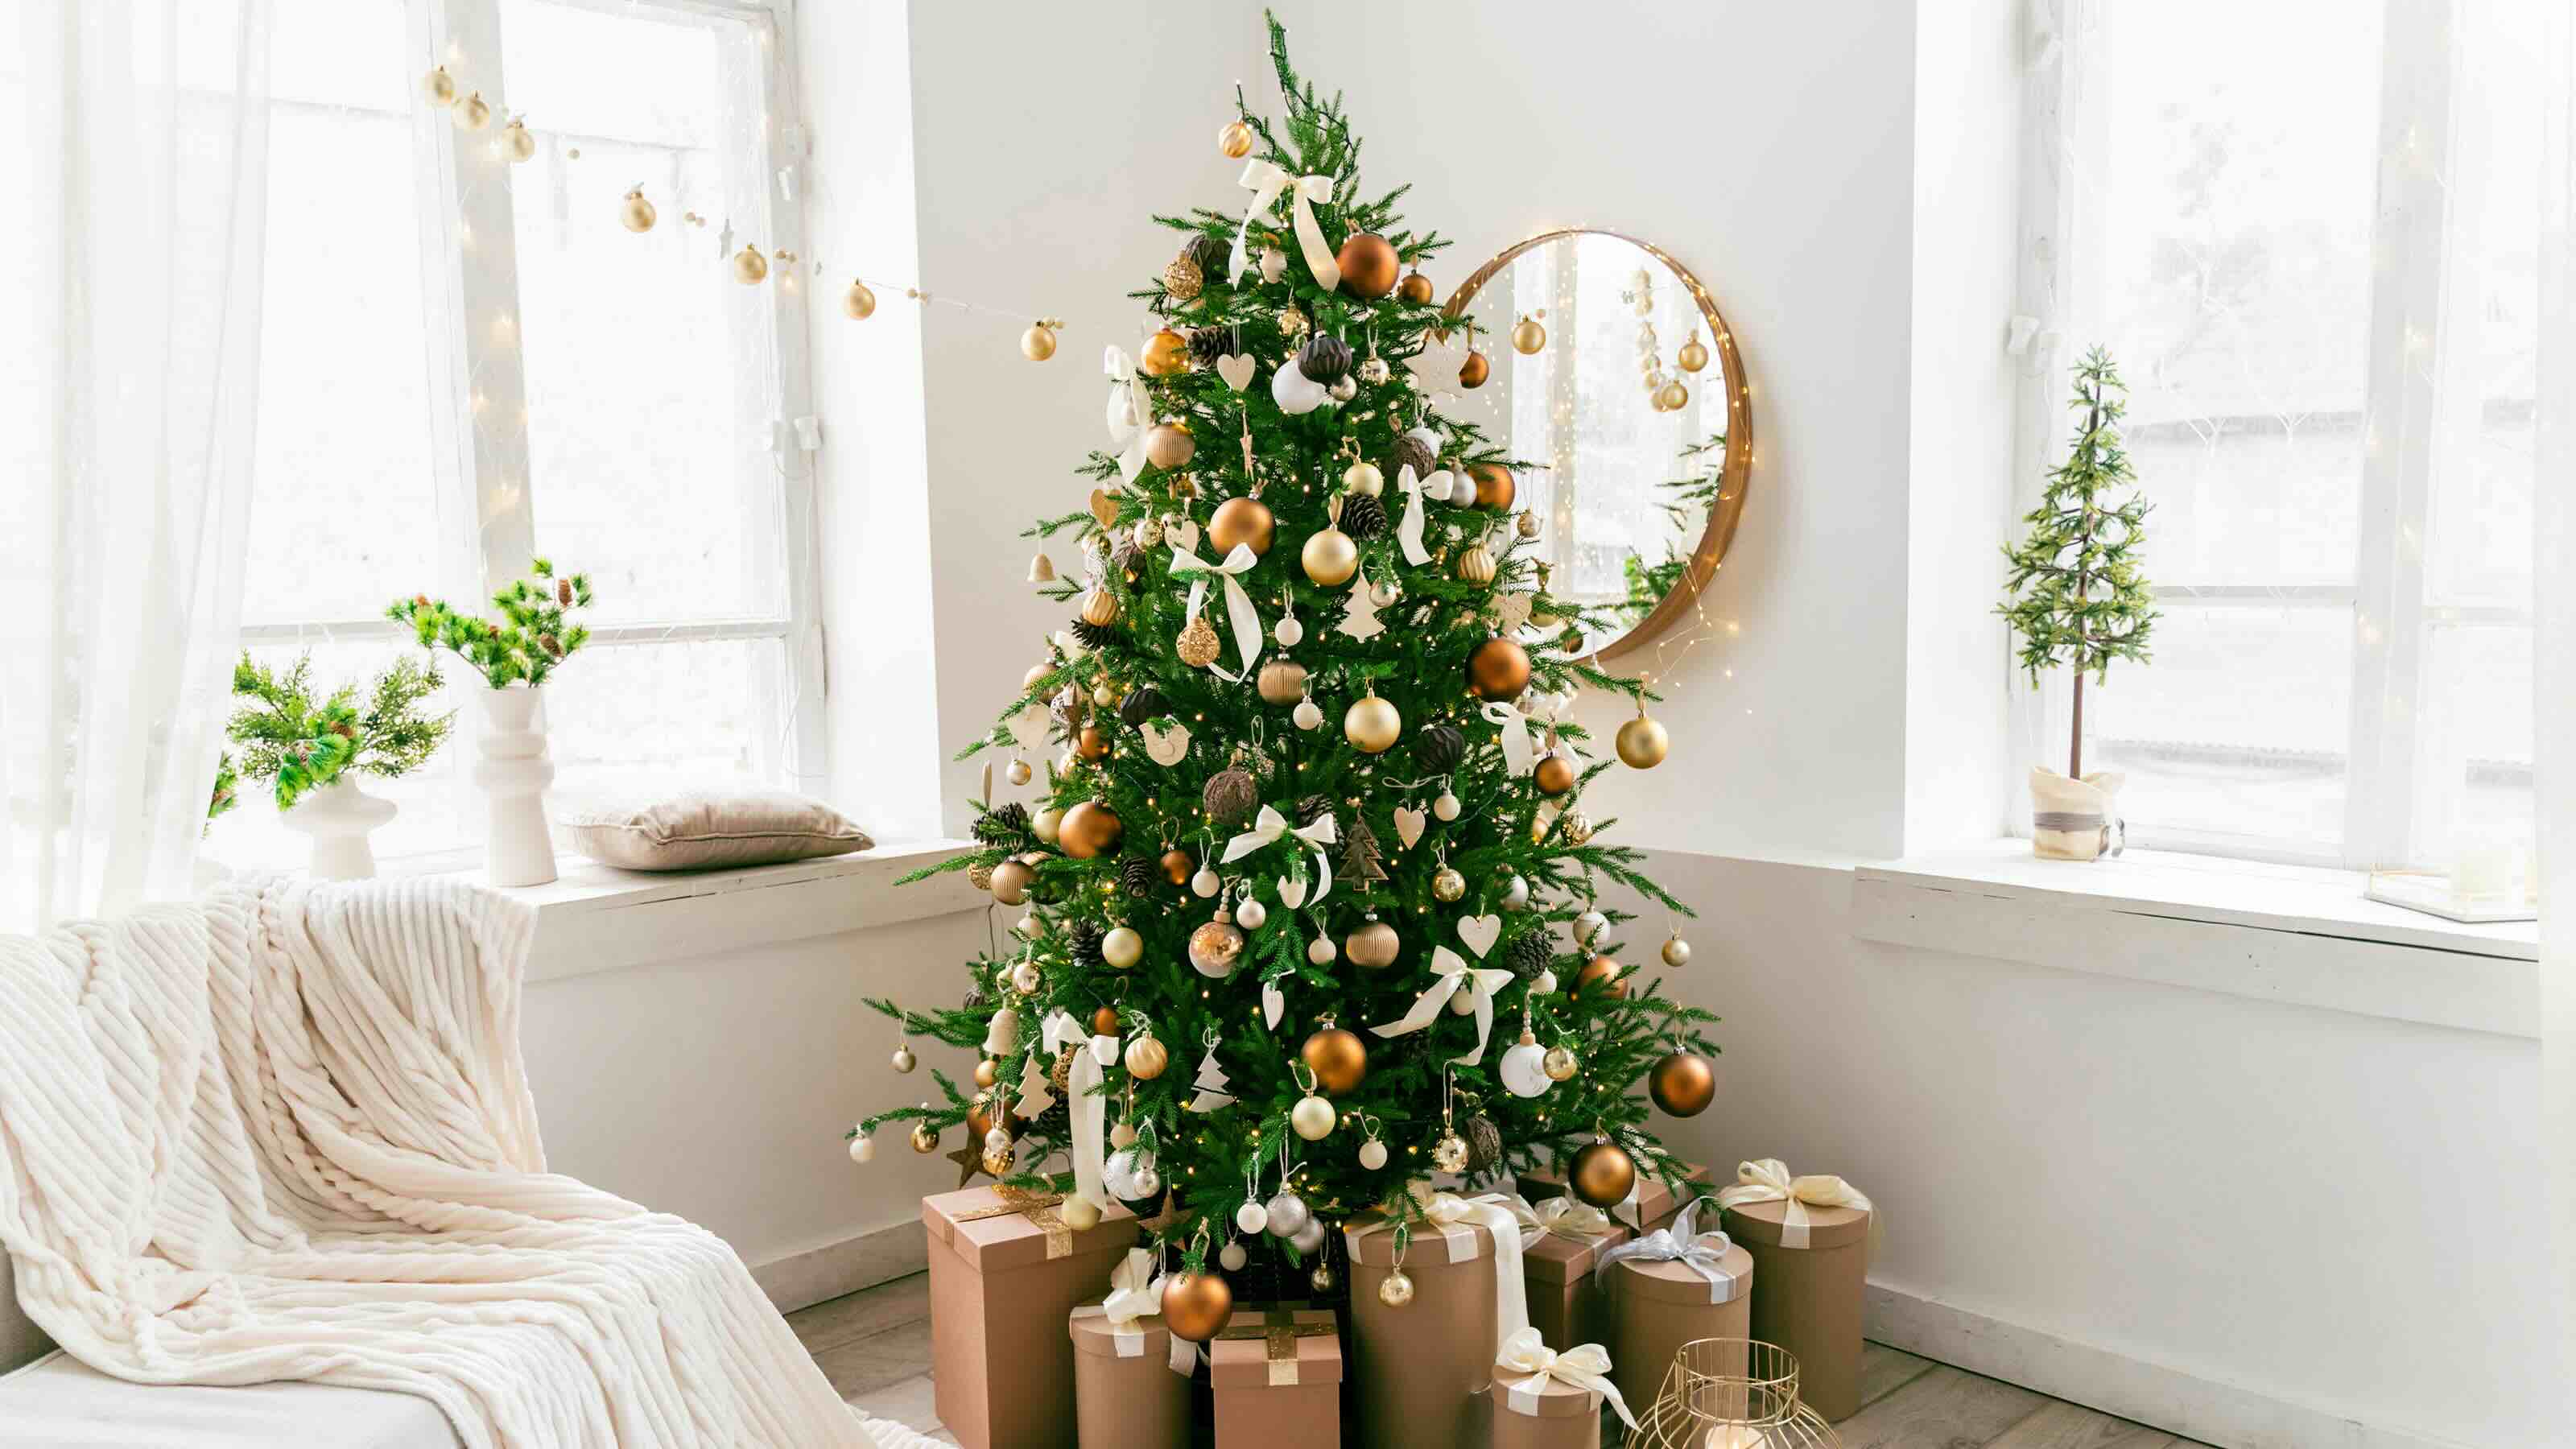 Revamping Your Home For The Holidays: A Holiday Project Round Up